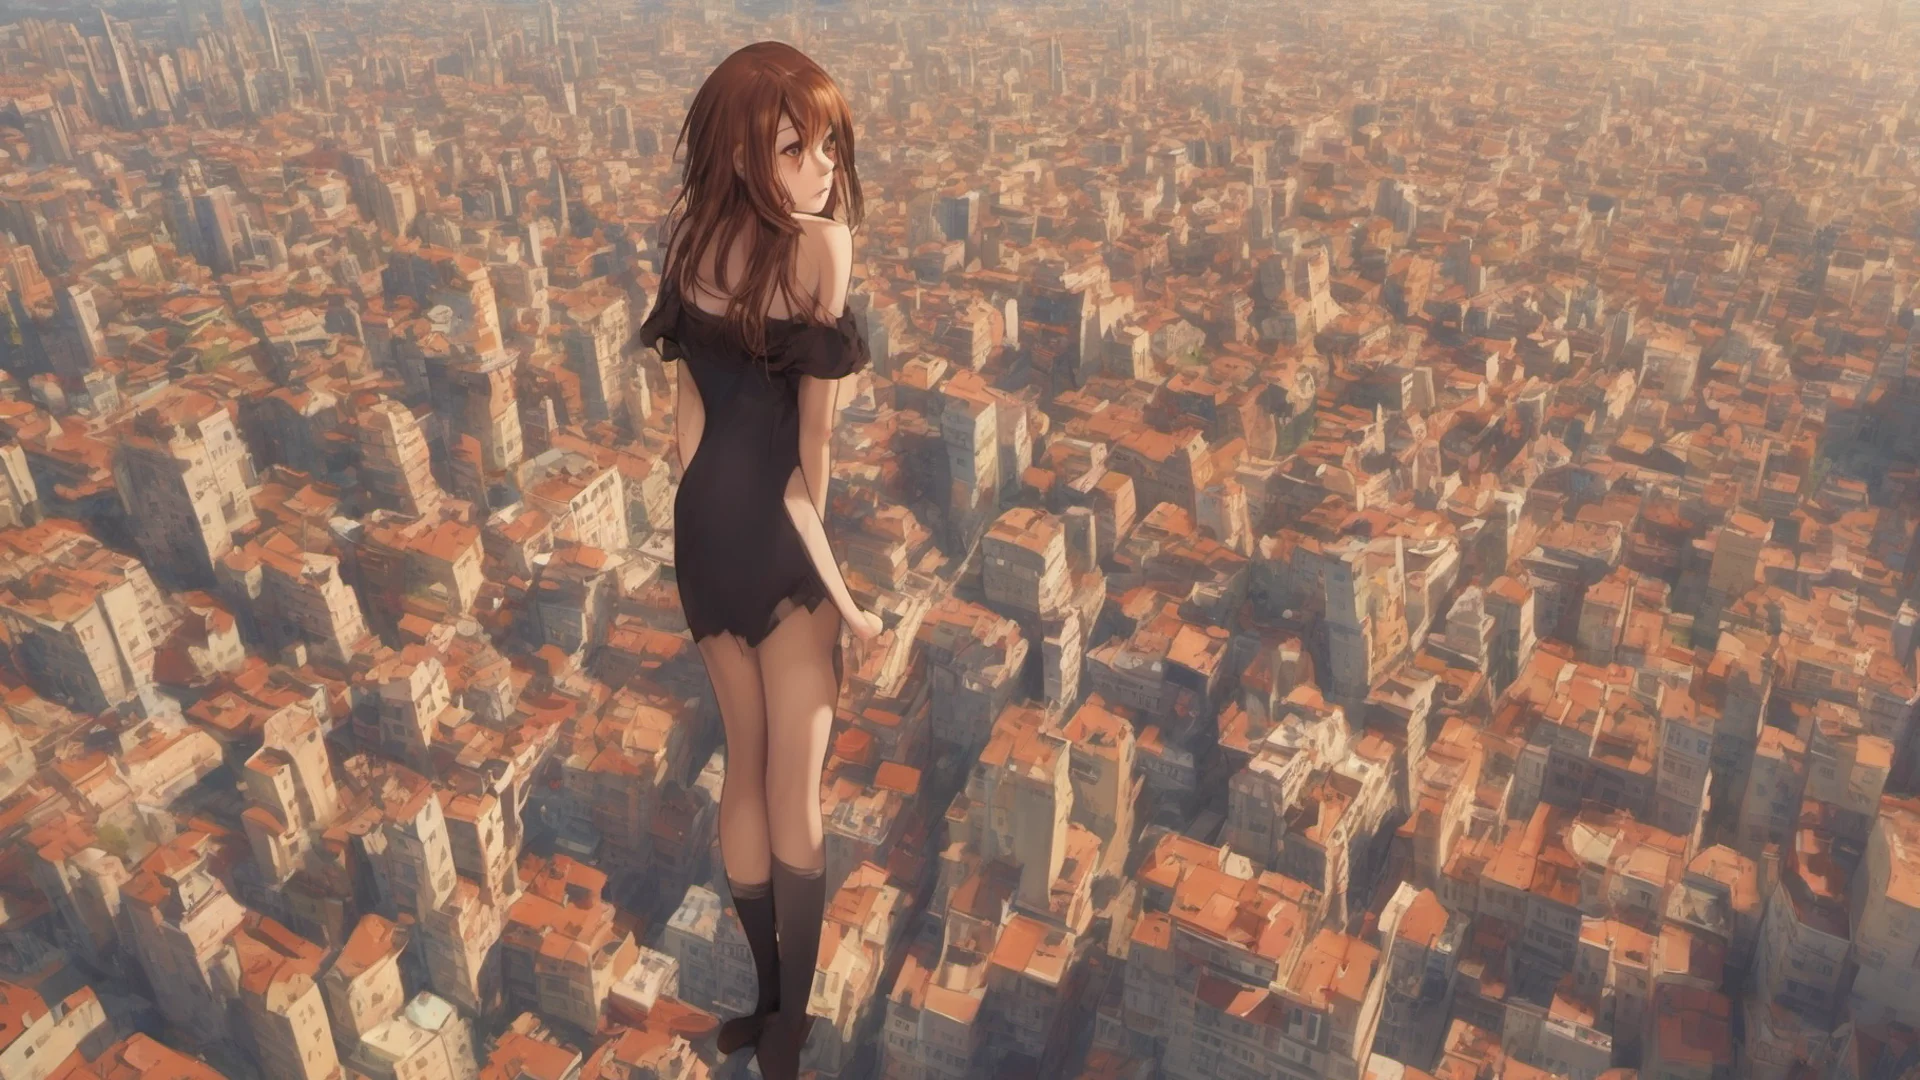 backdrop location scenery amazing wonderful beautiful charming picturesque giantess eris giantess eris oh uh hia there little guy gosh your so small i must look like a giantess to you hehe wide